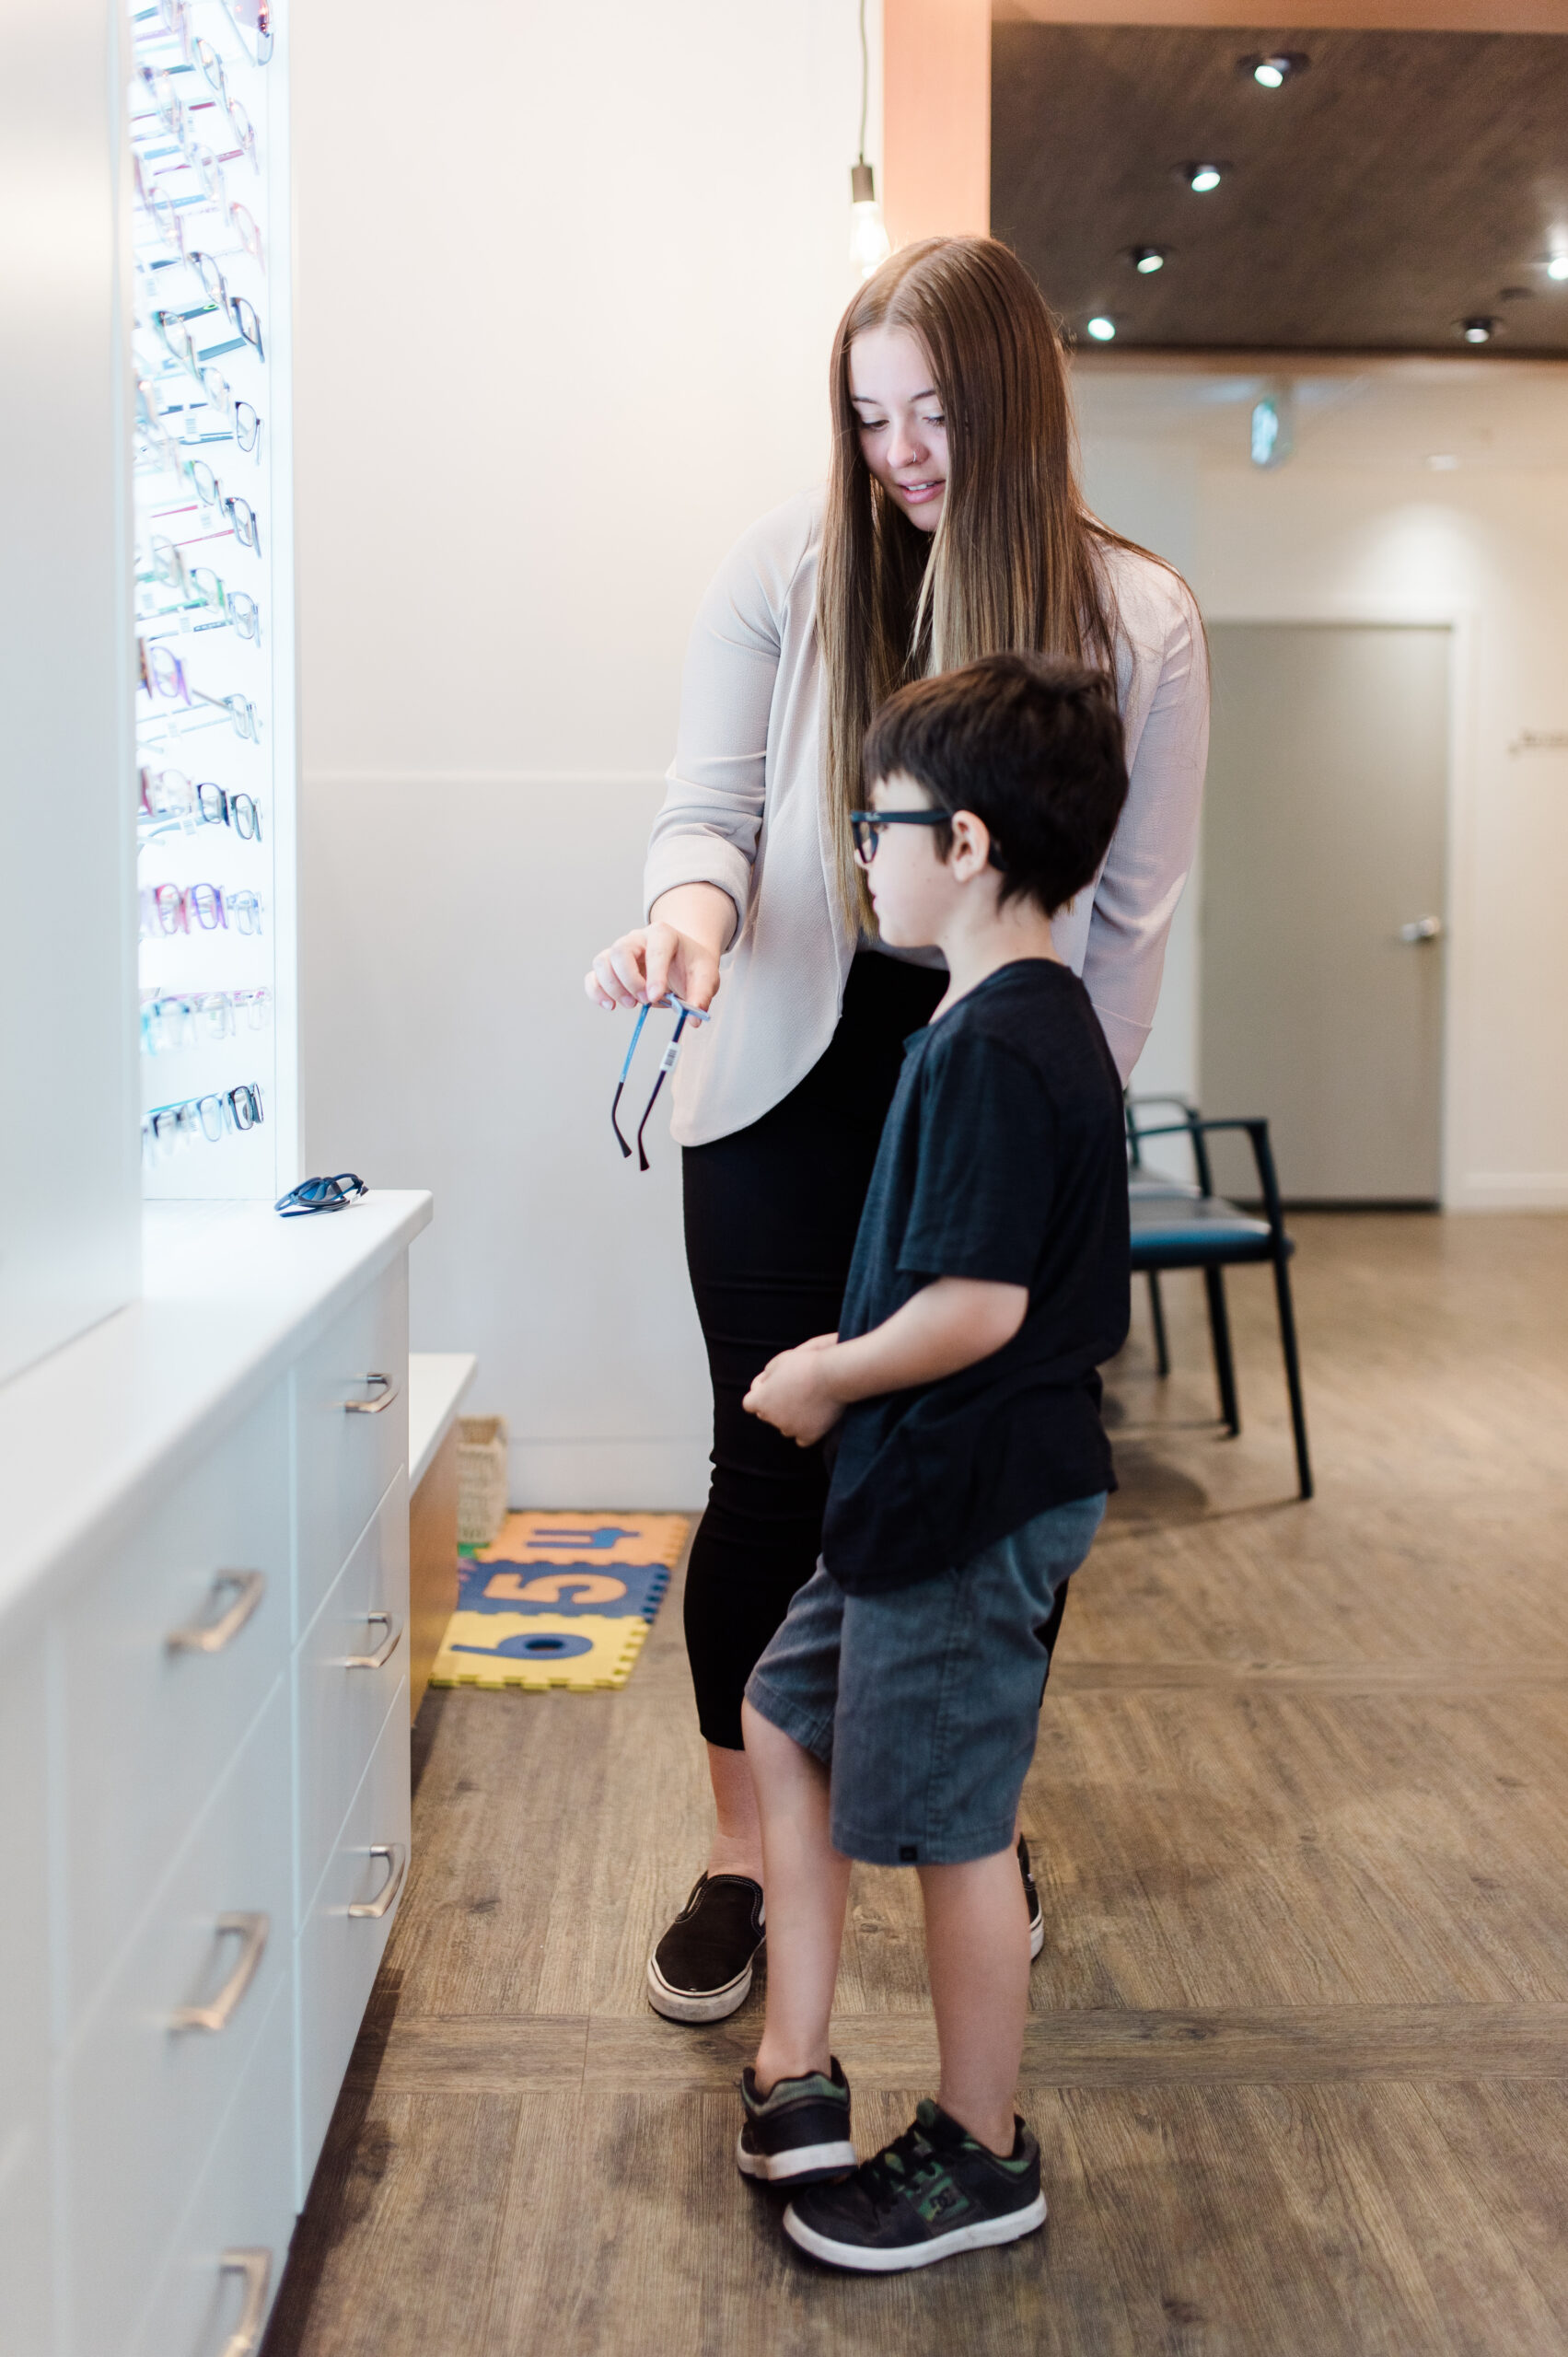 A team member at Nicola Eye Care explores options for a children's eye glasses in their Kamloops location